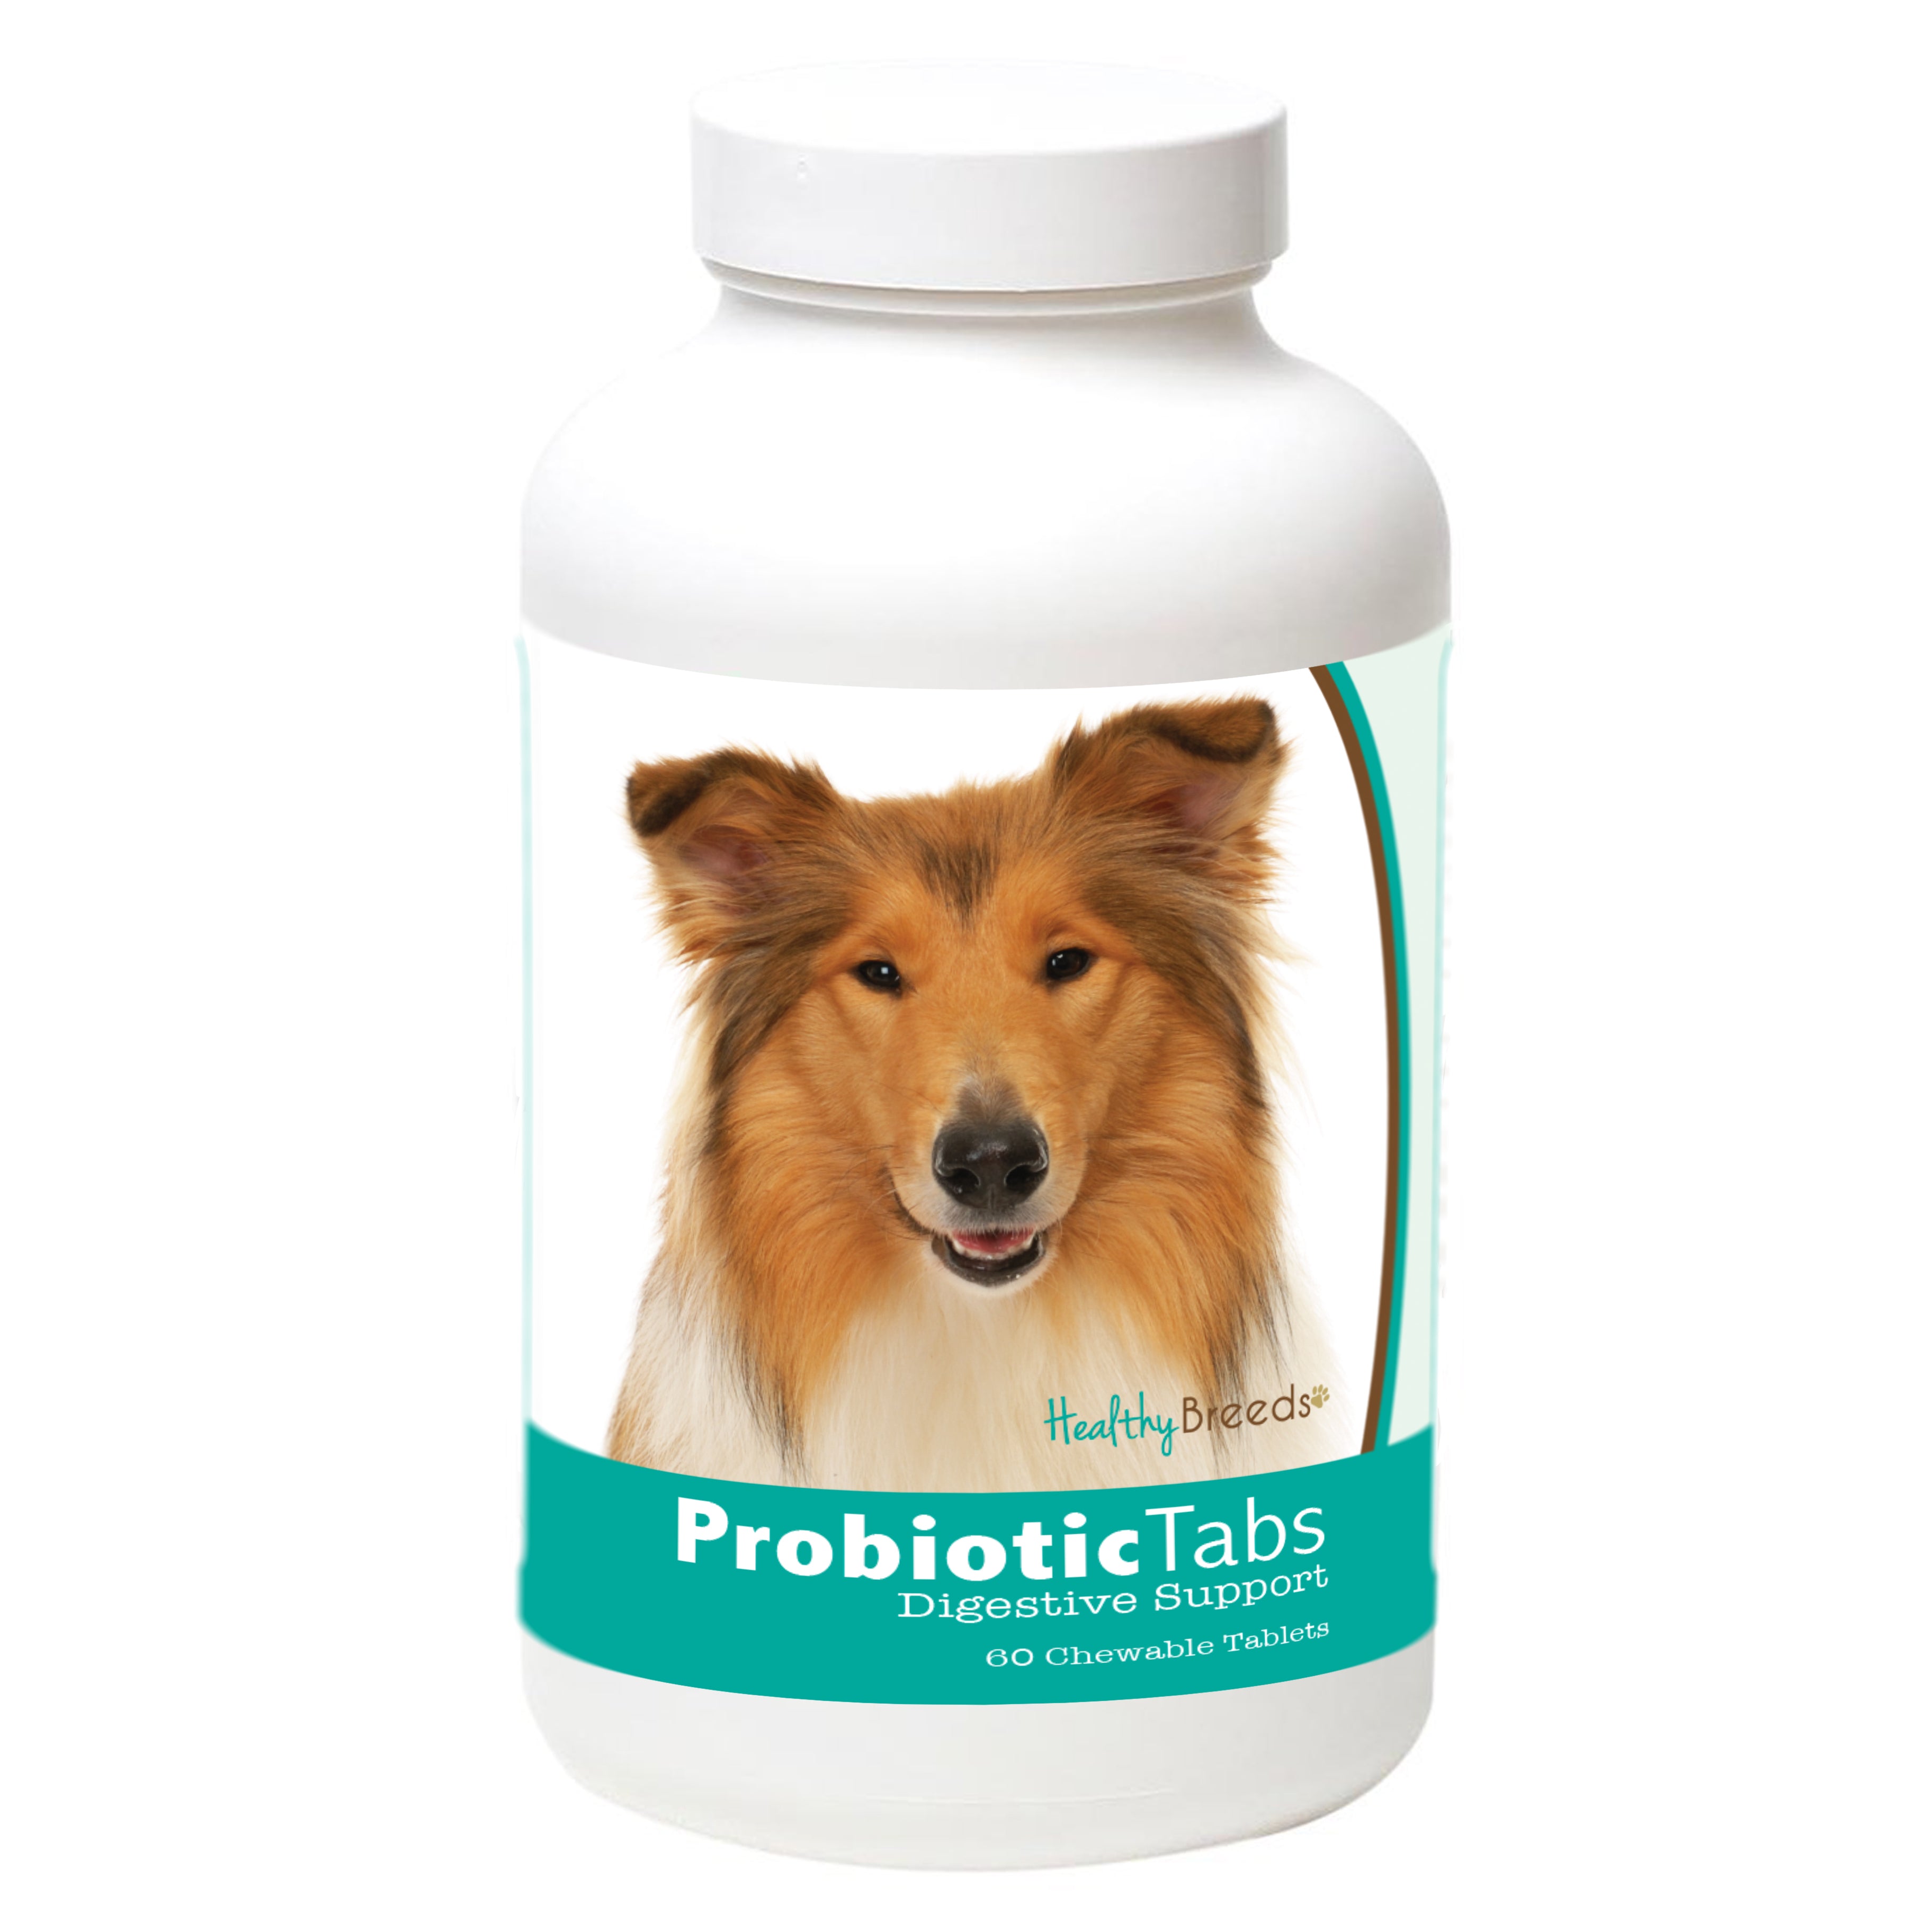 Collie Probiotic and Digestive Support for Dogs 60 Count